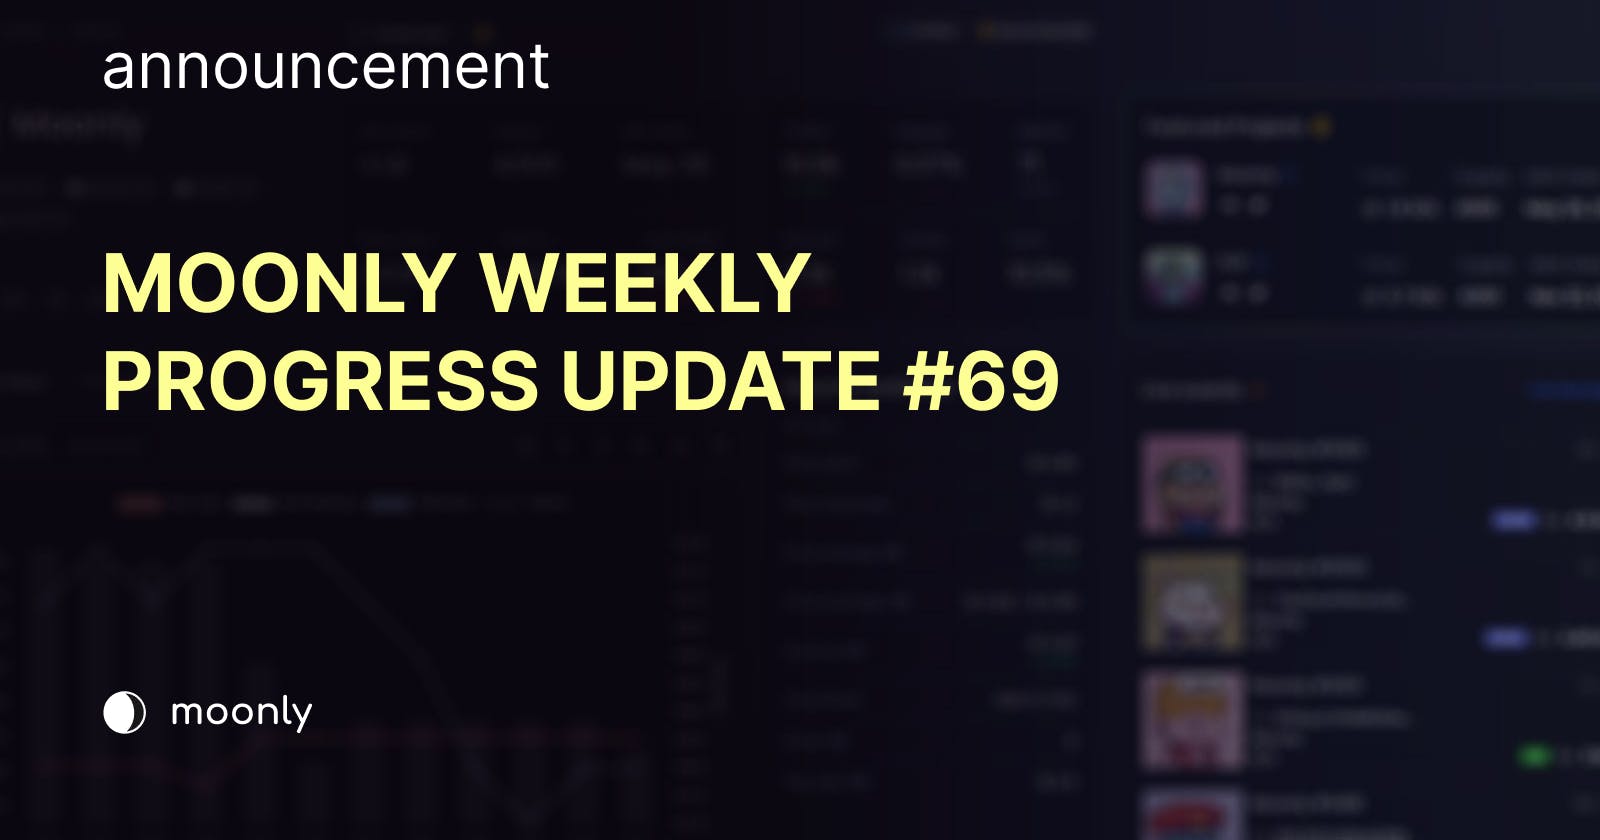 Moonly weekly progress update #69 - Karamendos WL Flow is in production